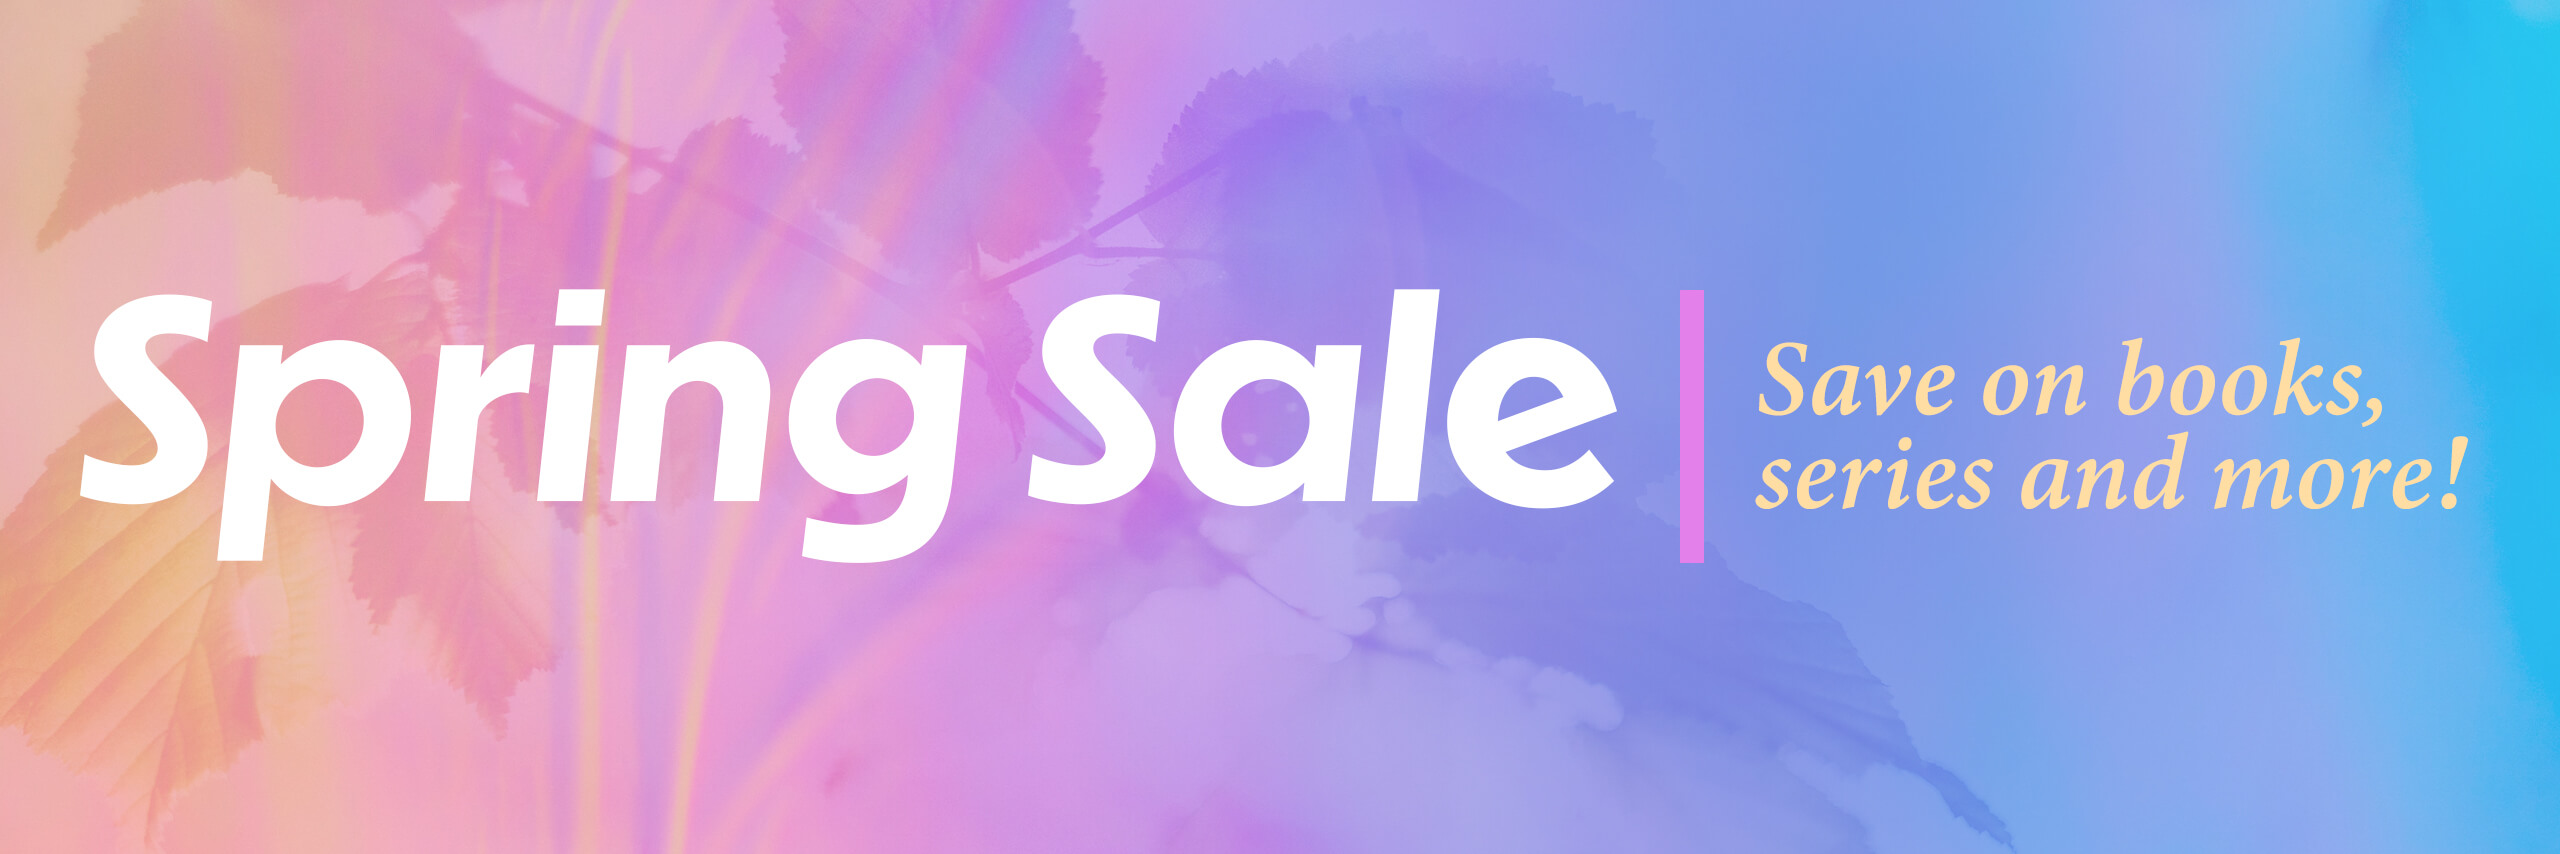 Spring Sale | Save on books, series and more!